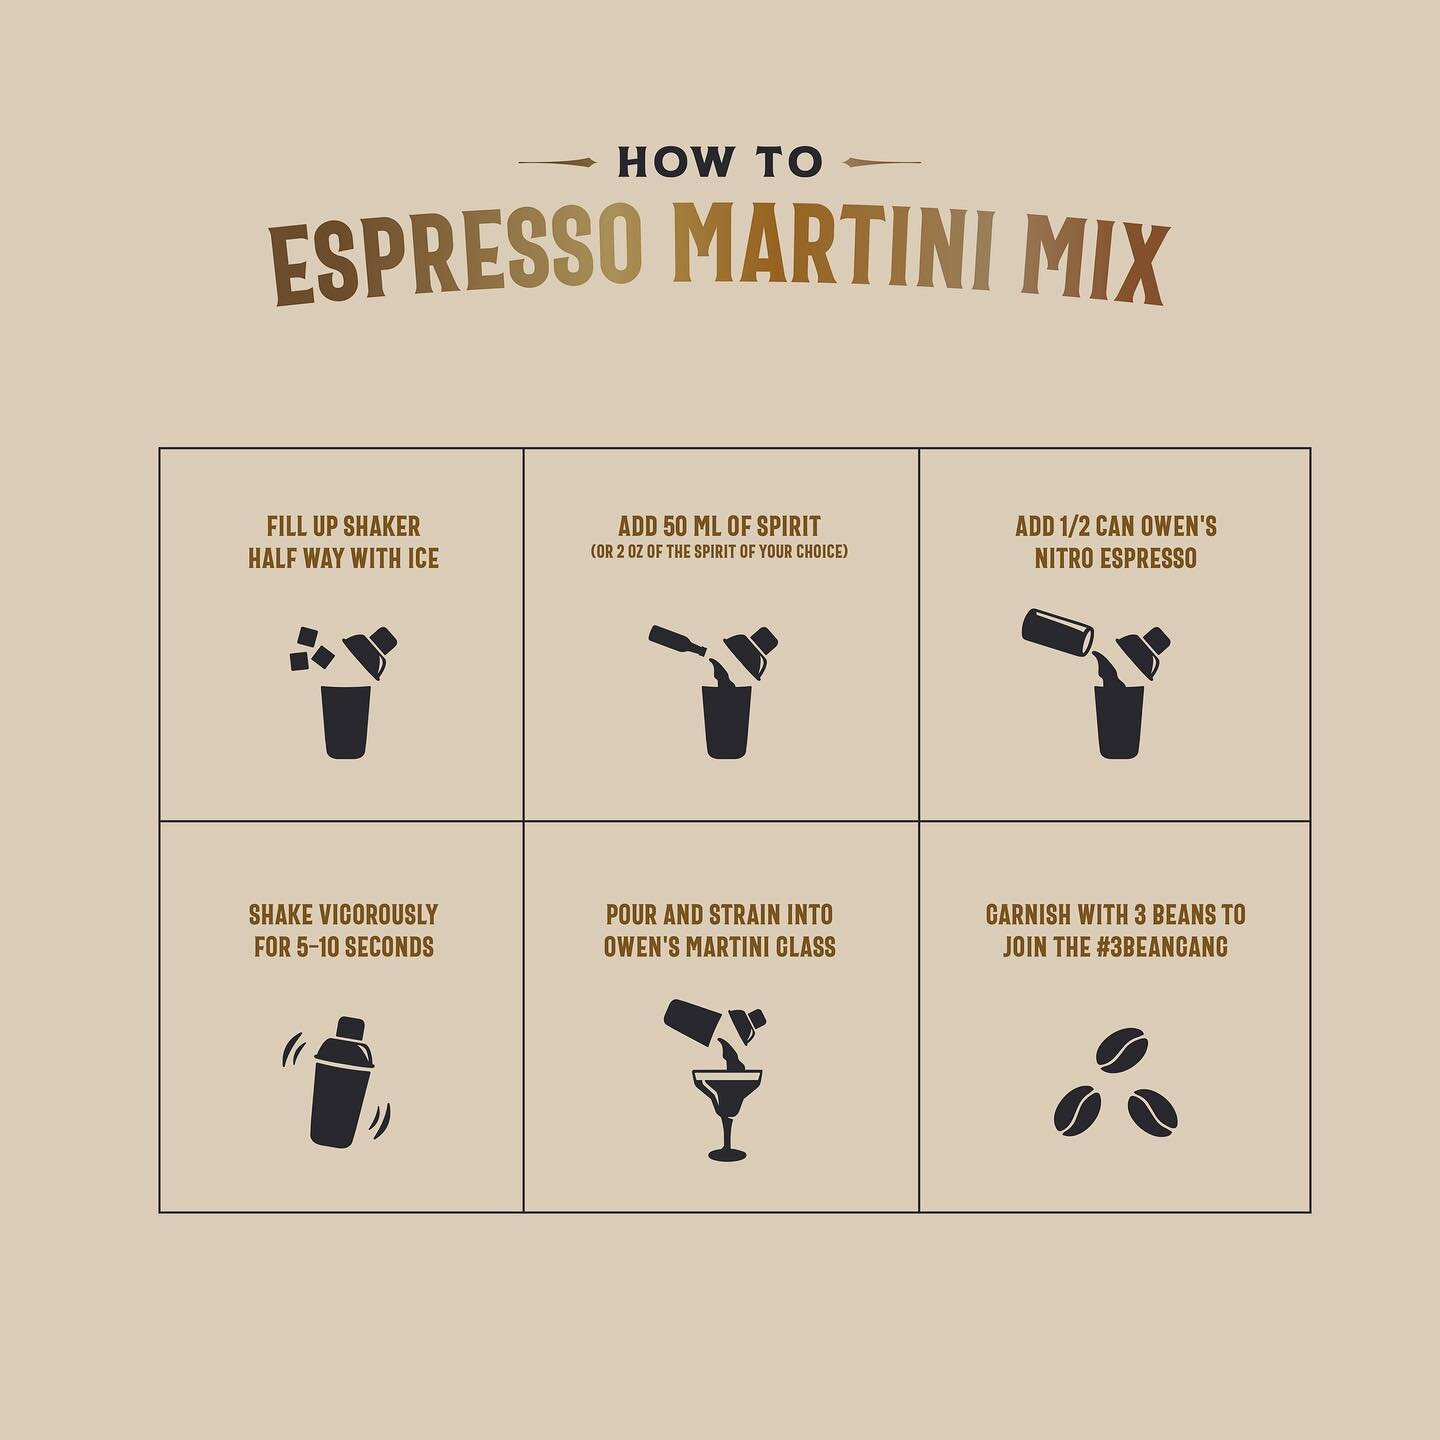 A how to graphic for @owensmixers espresso martini mix

#icondesign #iconaday #iconography